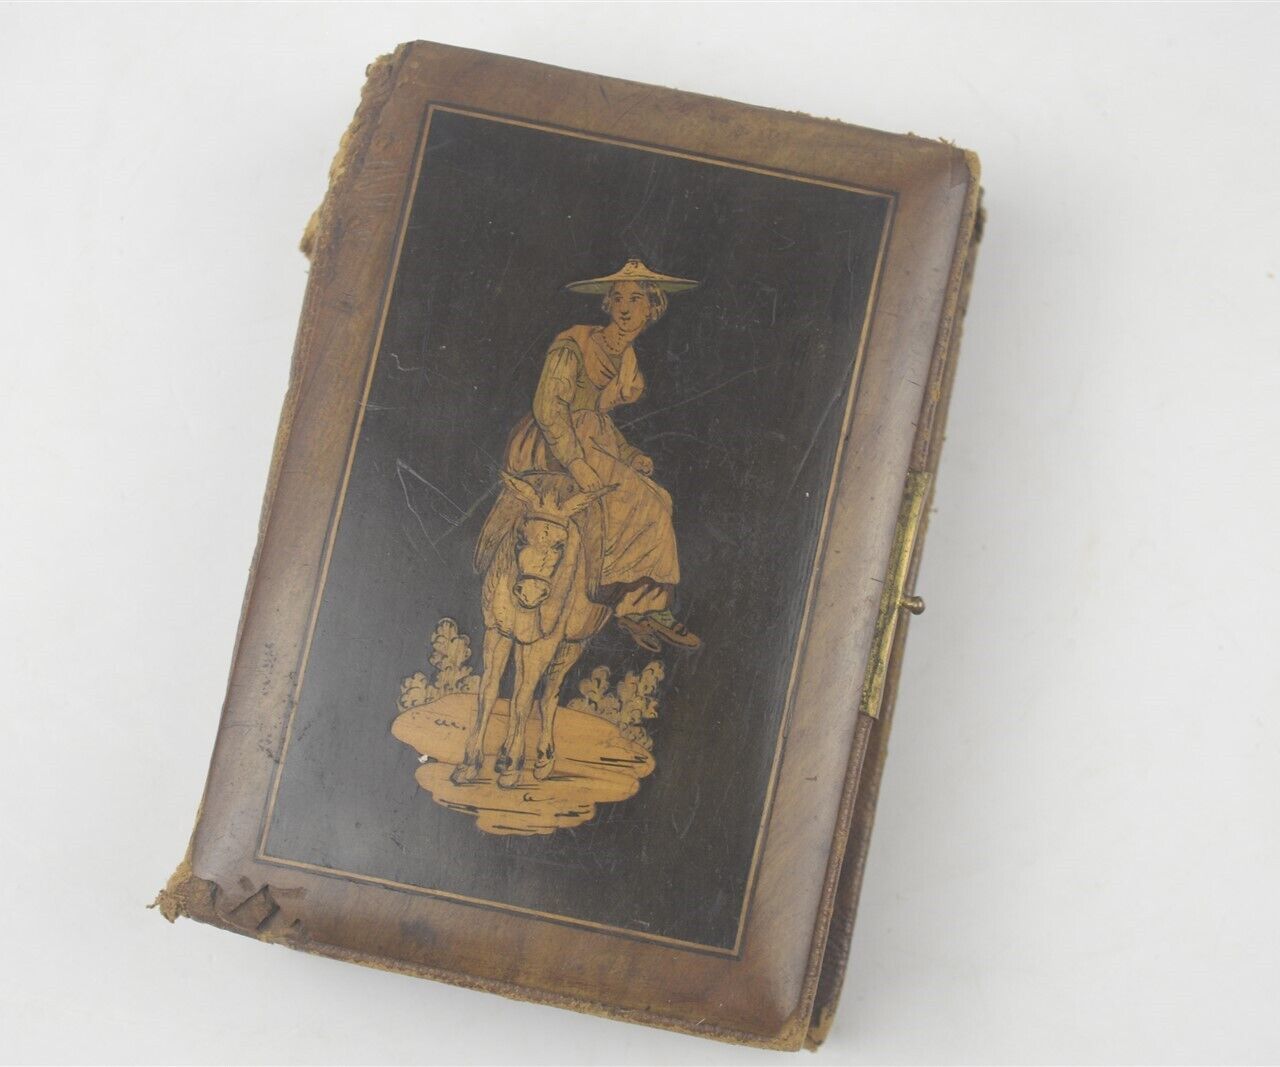 Antique 1860s Wood Inlaid CDV Album with Collection of Prang Chromolithographs